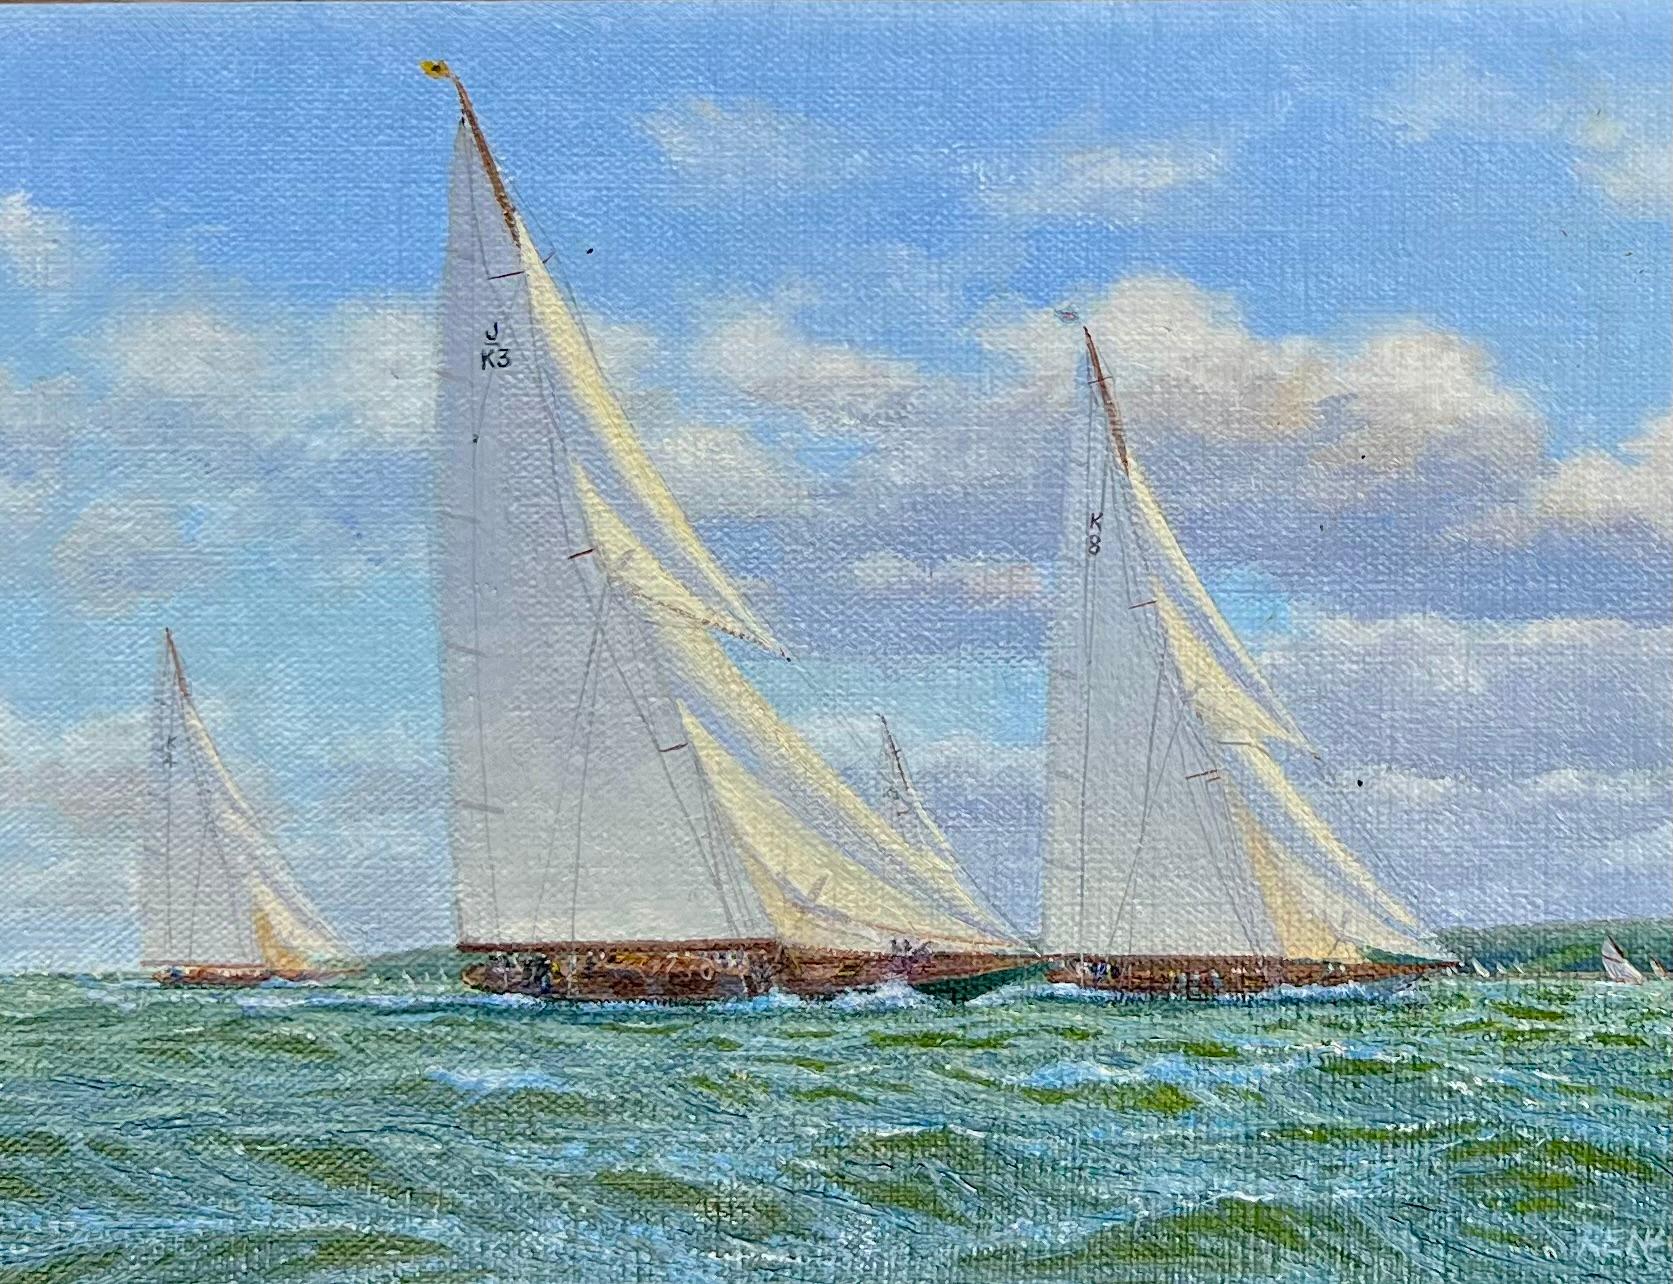 Yachts racing off the English coast. 
Oil on artist panel, signed lower right. 
Renard was born in Huddersfield, England in 1947. Although he was interested in art and clearly gifted artistically from an early age, he chose to go to teachers